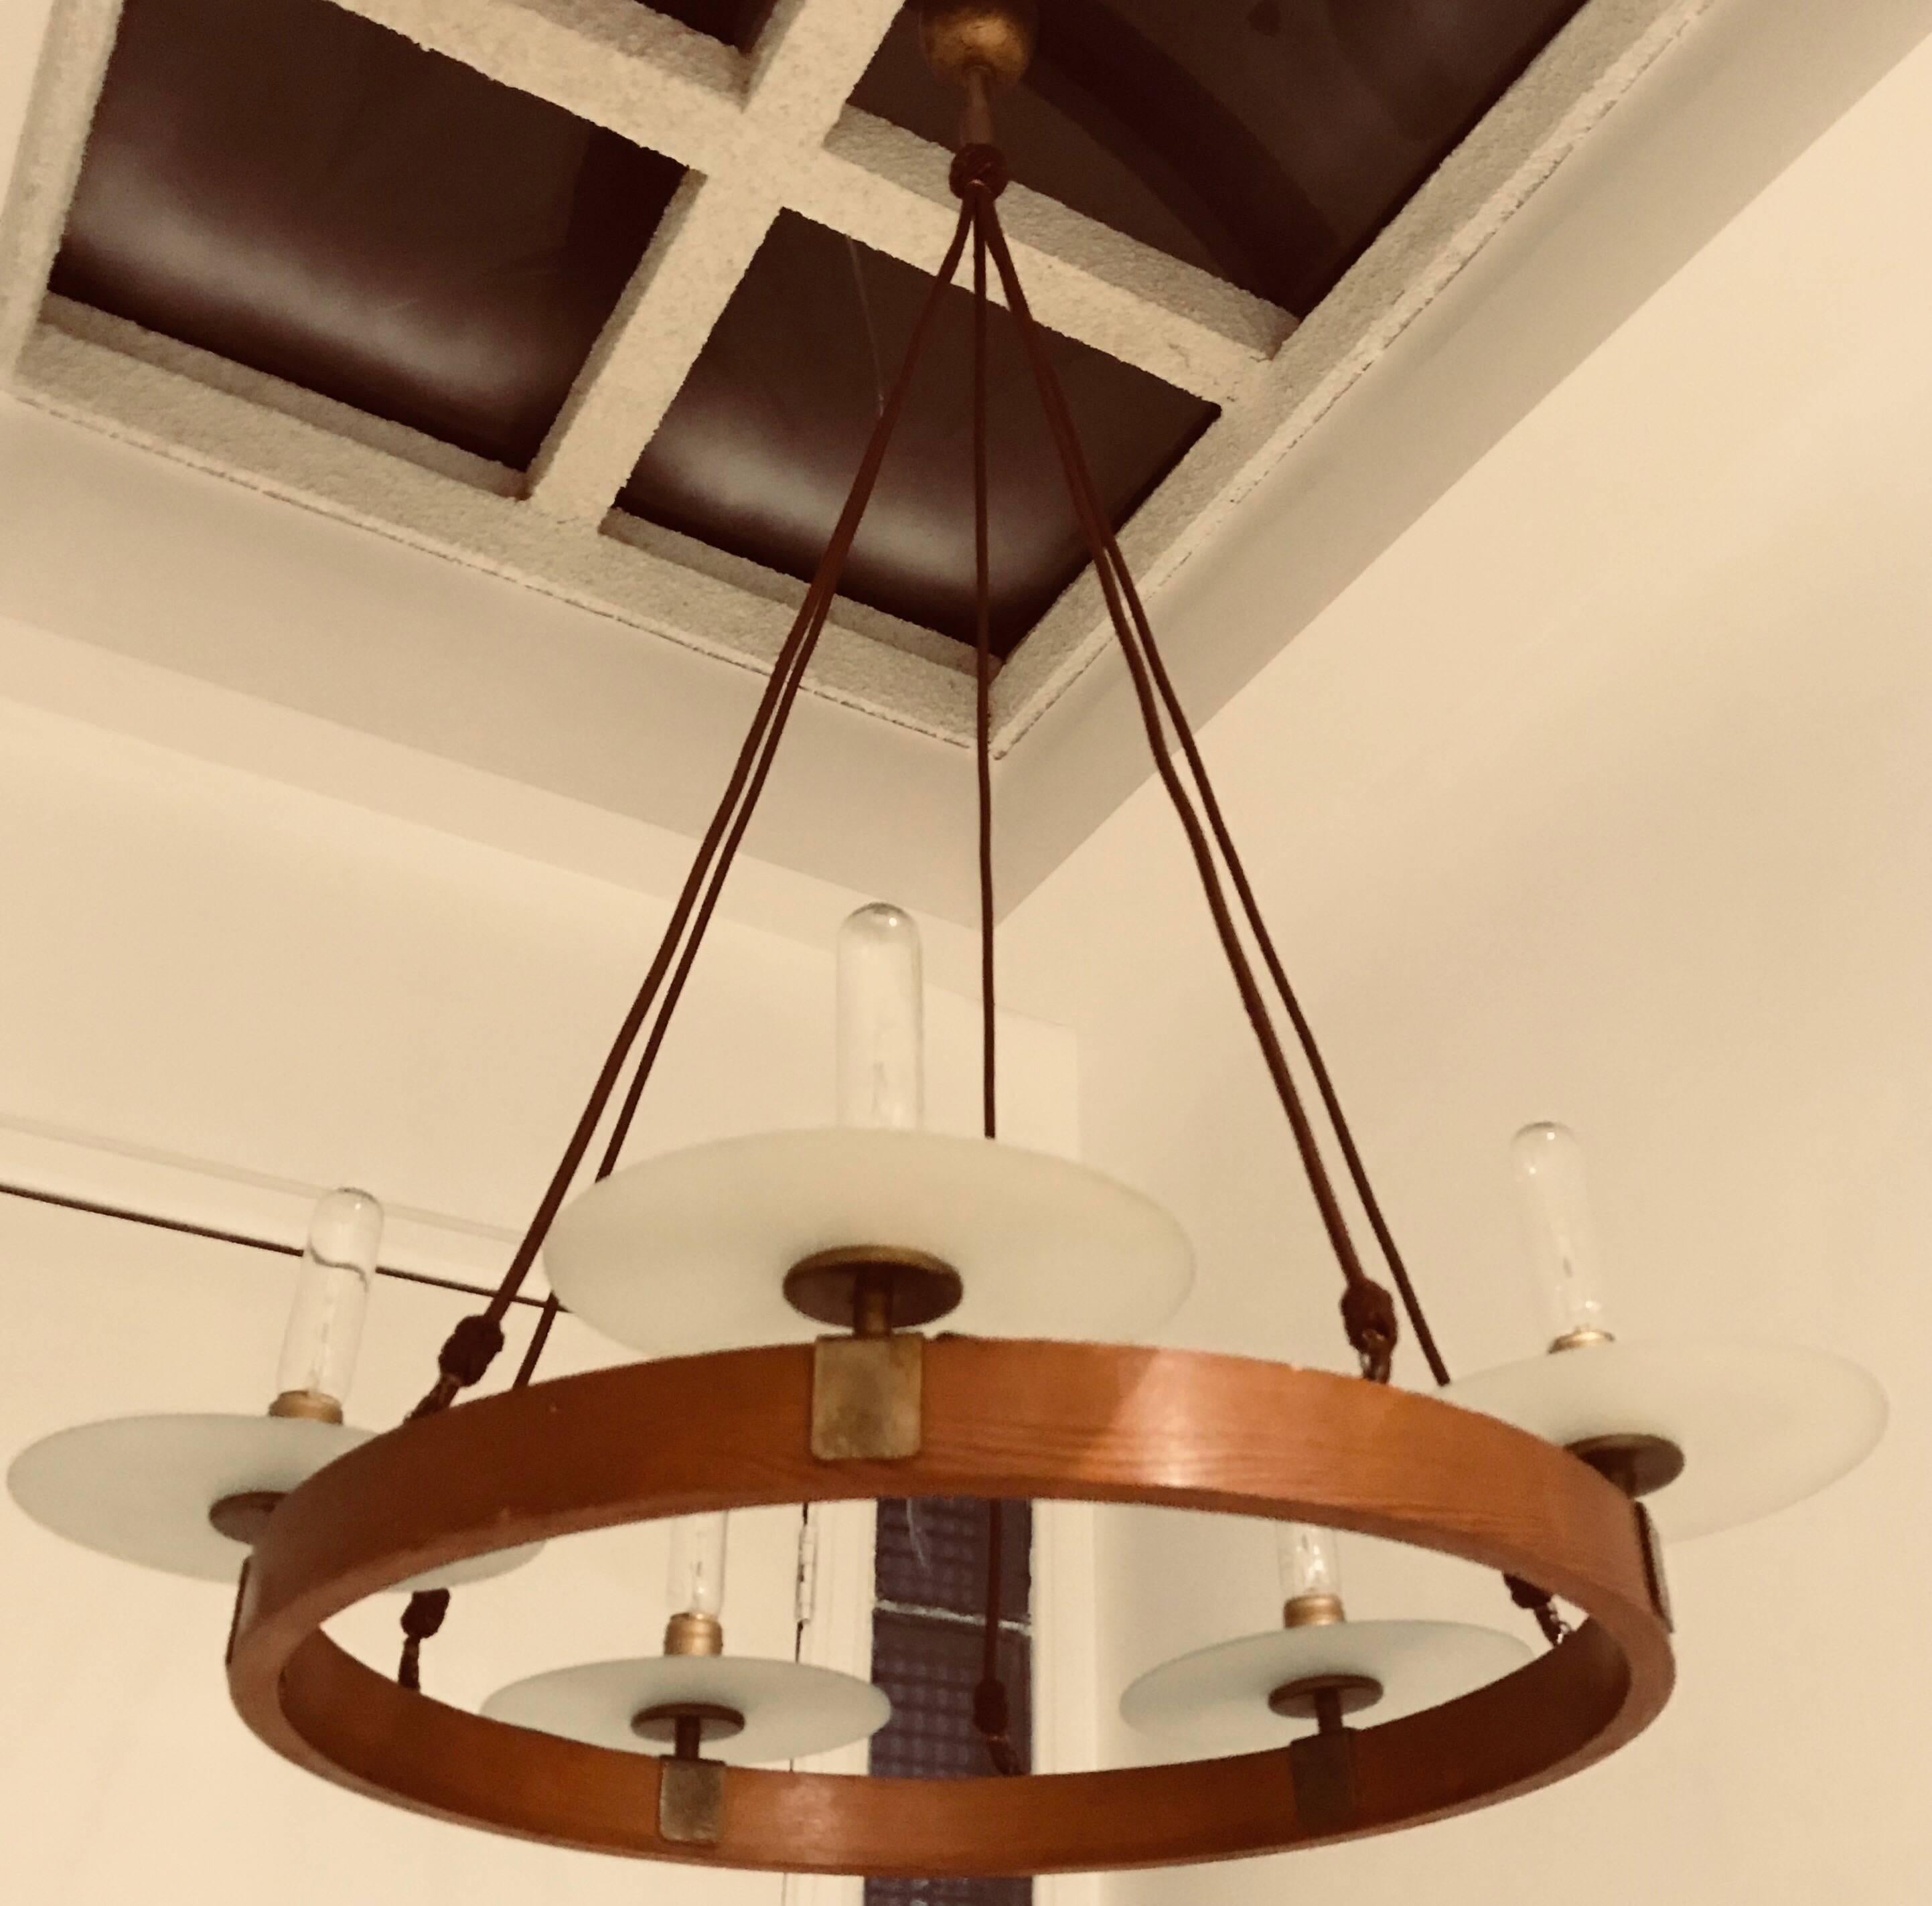 An original 1920s Austrian ring chandelier composed of an oak an brass body with frosted glass disk shades held by brown decorative silk cords . Five lights sources. Newly rewired. Height can be adjusted.